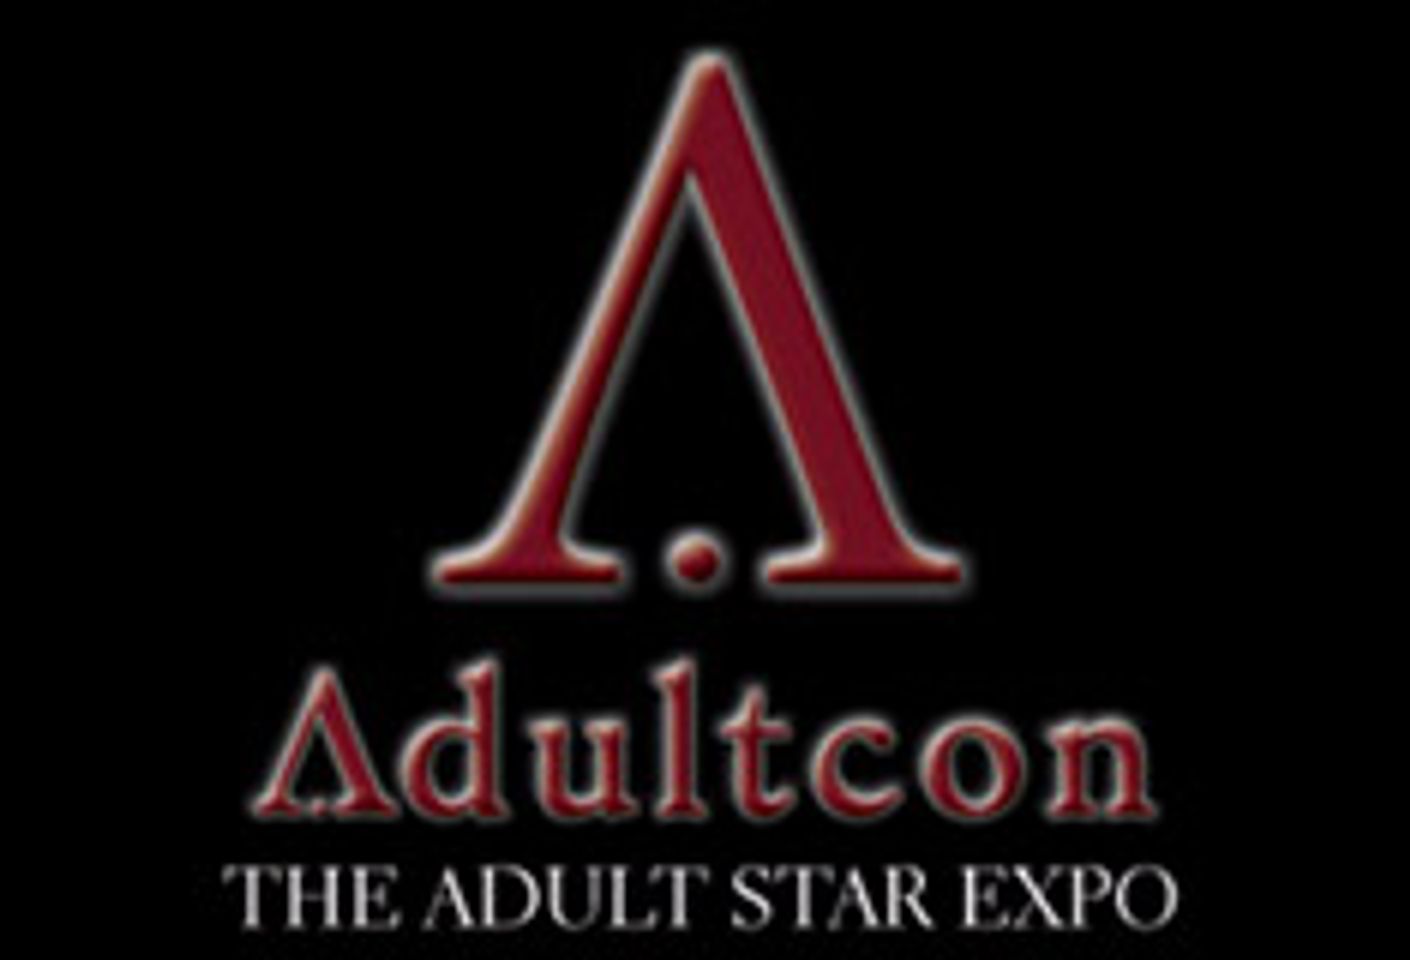 Adultcon Expands to a Third Day